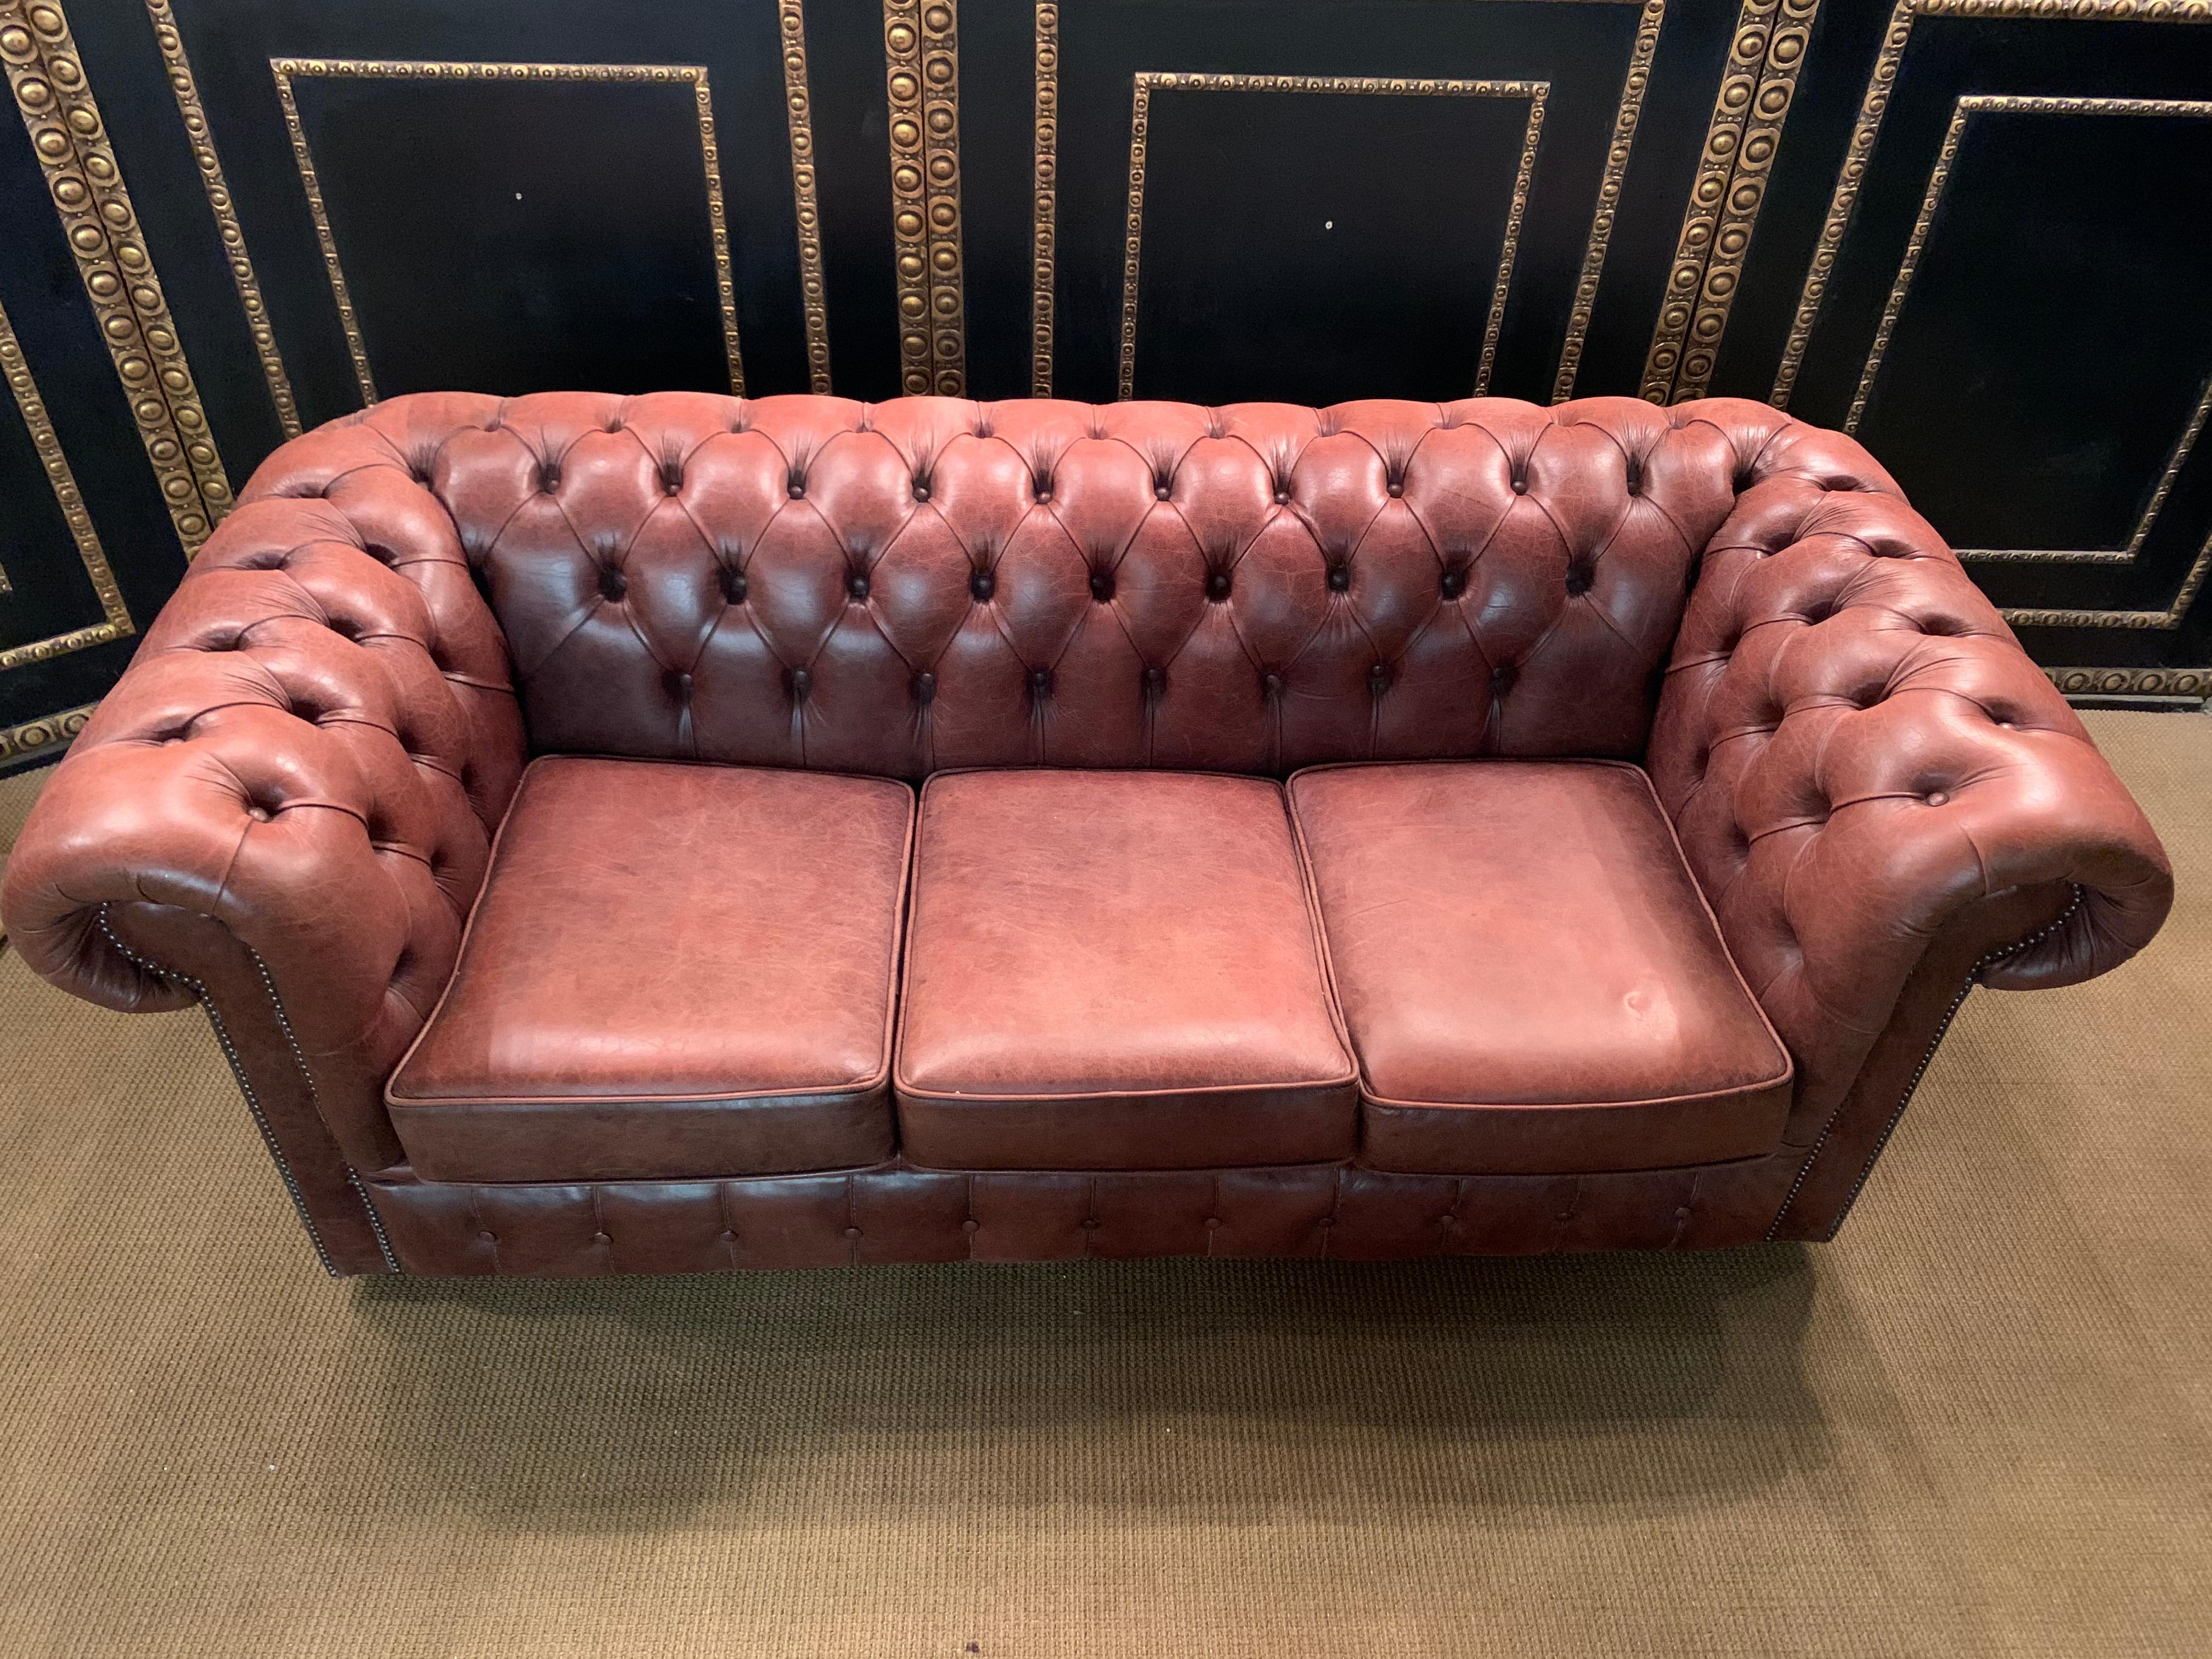 This original beautifully preserved Cognac leather three-seat sofa is very masculine. Coil sprung feather filled cushions - Vintage Cognac leather Chesterfield sofa with original coil sprung front edge and feather filled cushions. Please note all